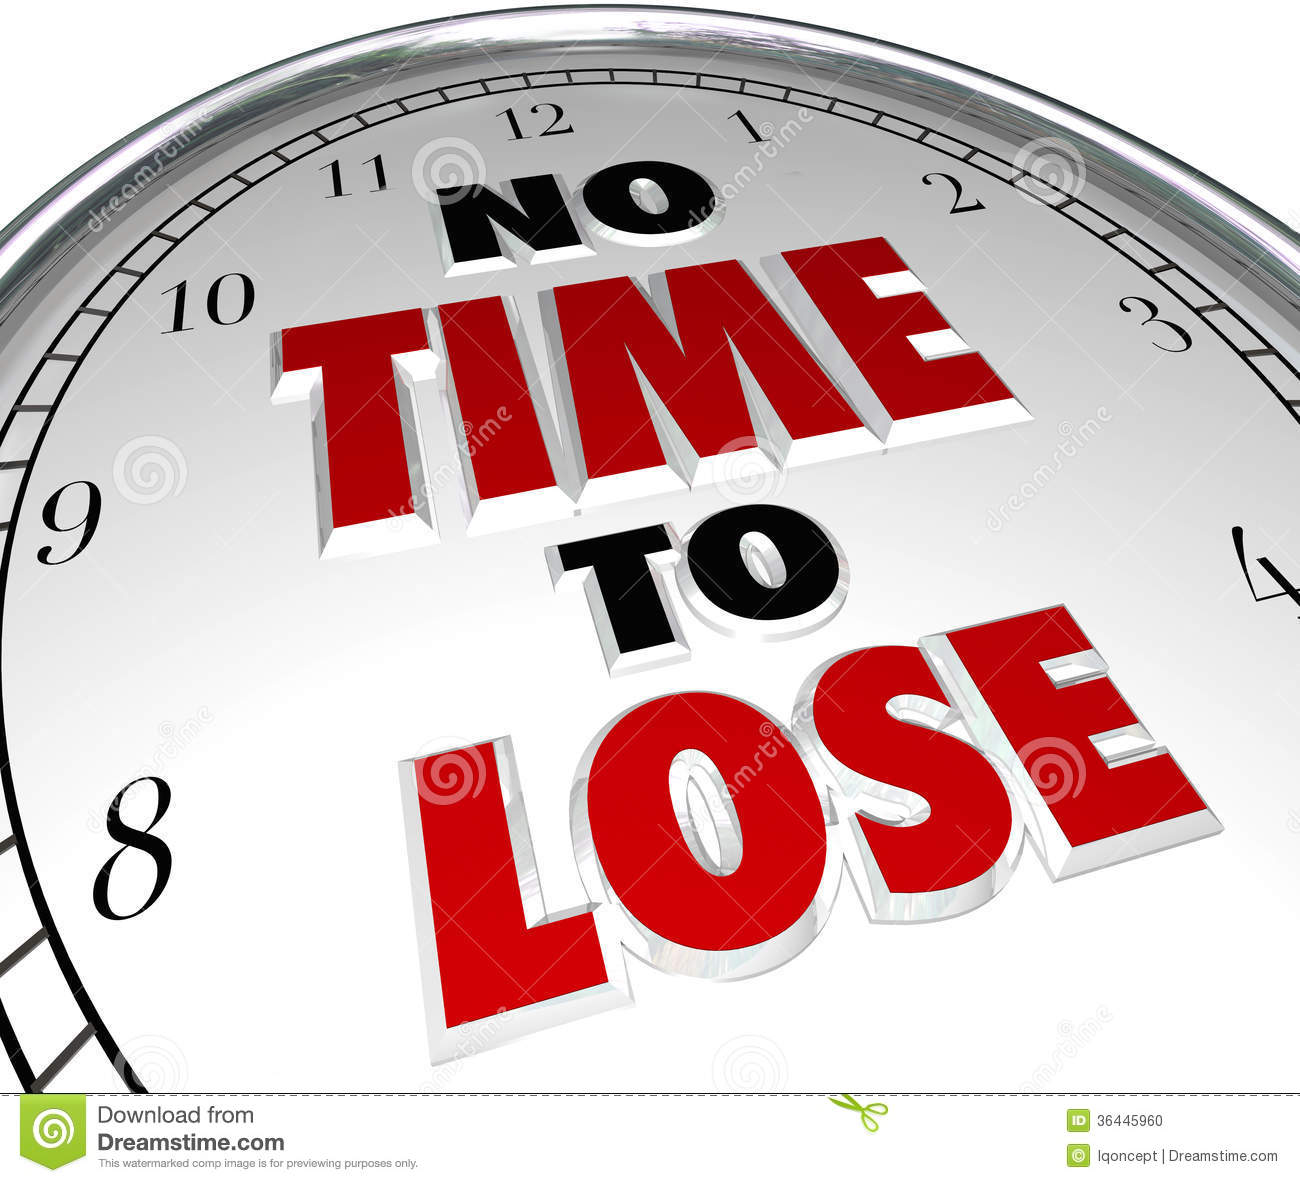 No Time To Lose Saying Or Quote On A White Clock Face To Illustrate A